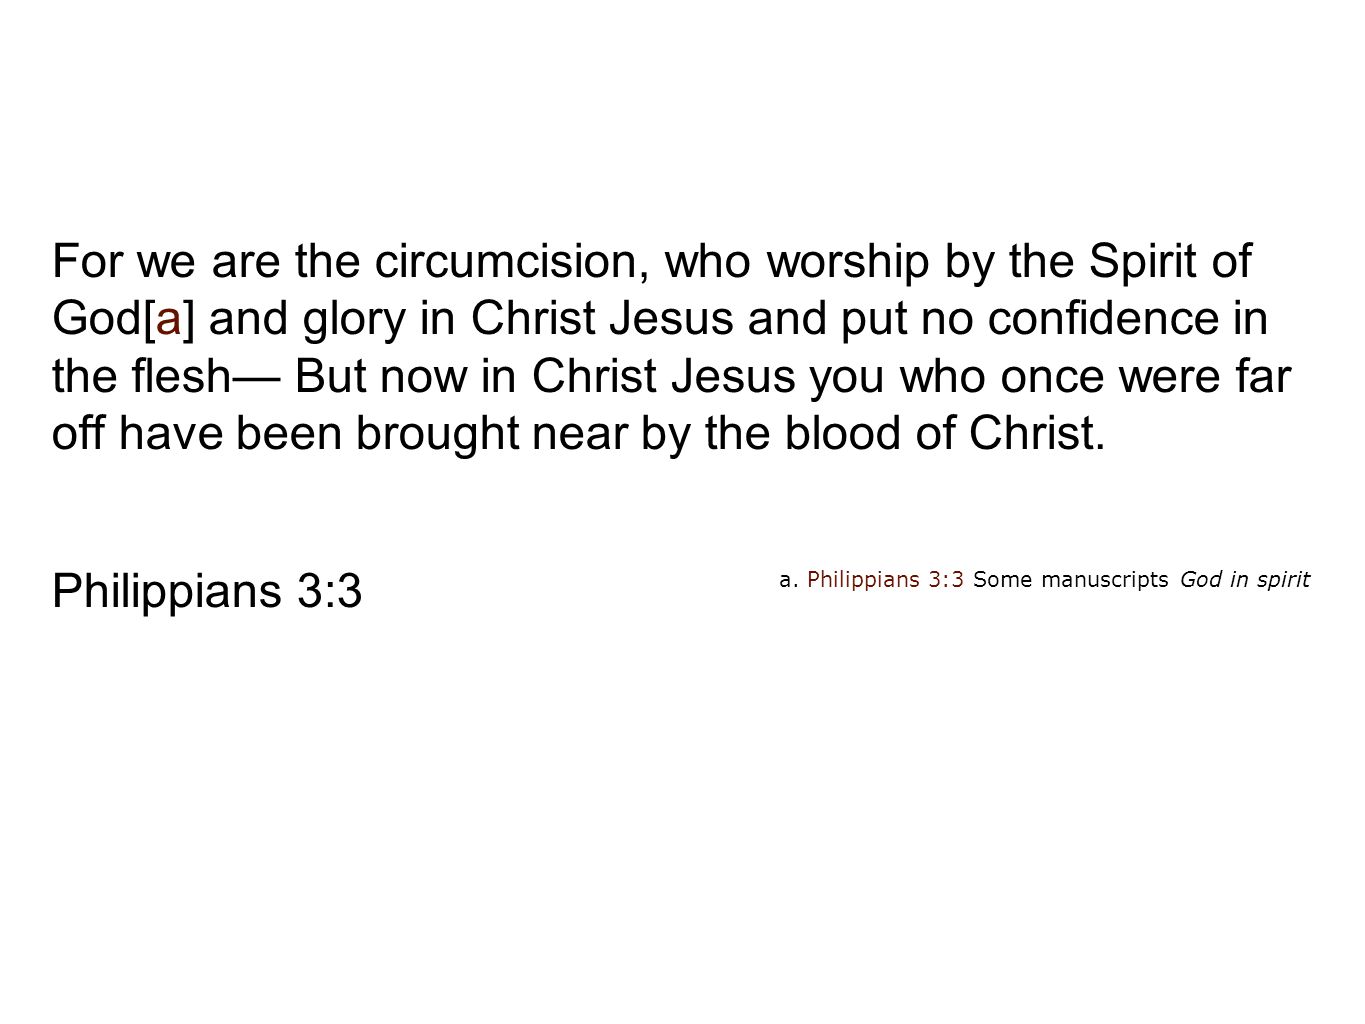 For we are the circumcision, who worship by the Spirit of God[a] and glory in Christ Jesus and put no confidence in the flesh— But now in Christ Jesus you who once were far off have been brought near by the blood of Christ.